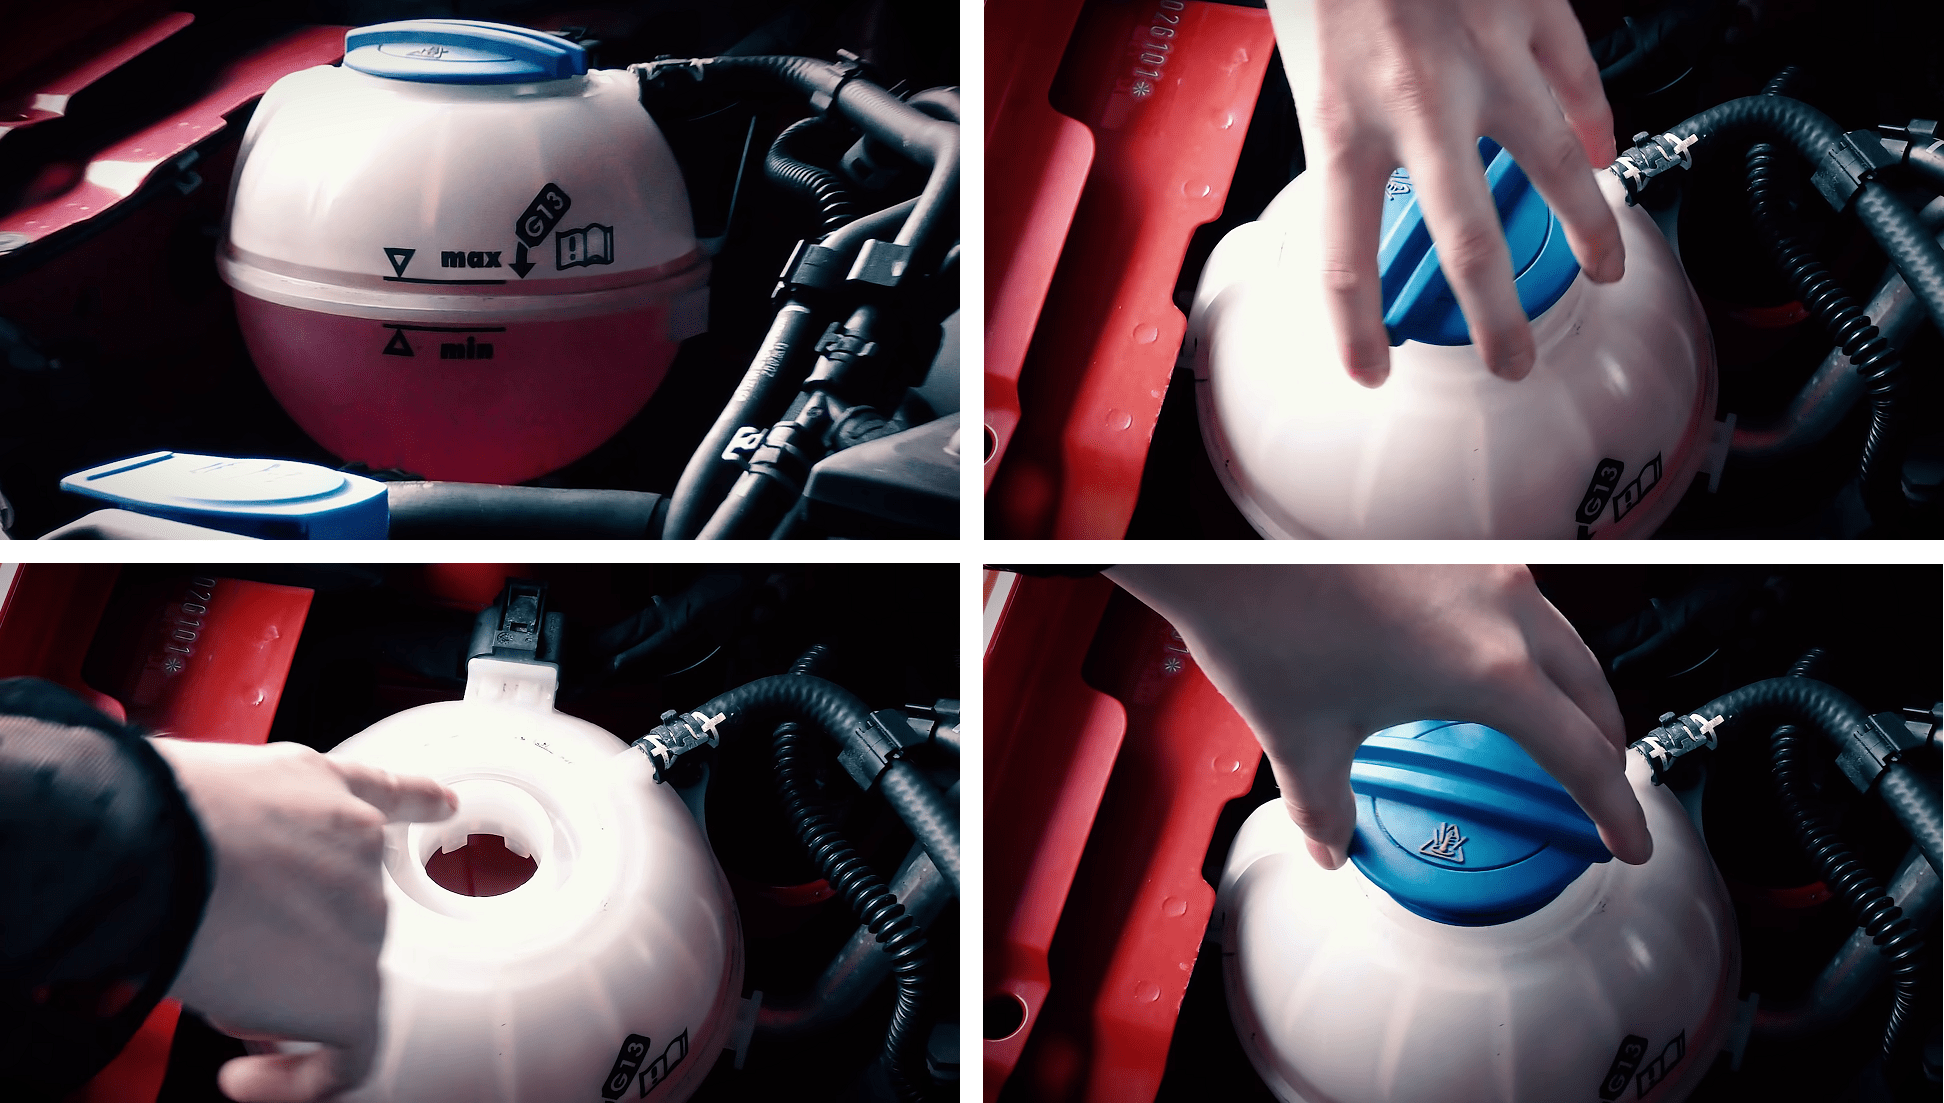 A consolidated guide within a single image, featuring four sequentially arranged images (1, 2, 3, 4). The visual instructions provide a step-by-step demonstration on how to check the engine coolant level for proper maintenance and cooling system functionality.